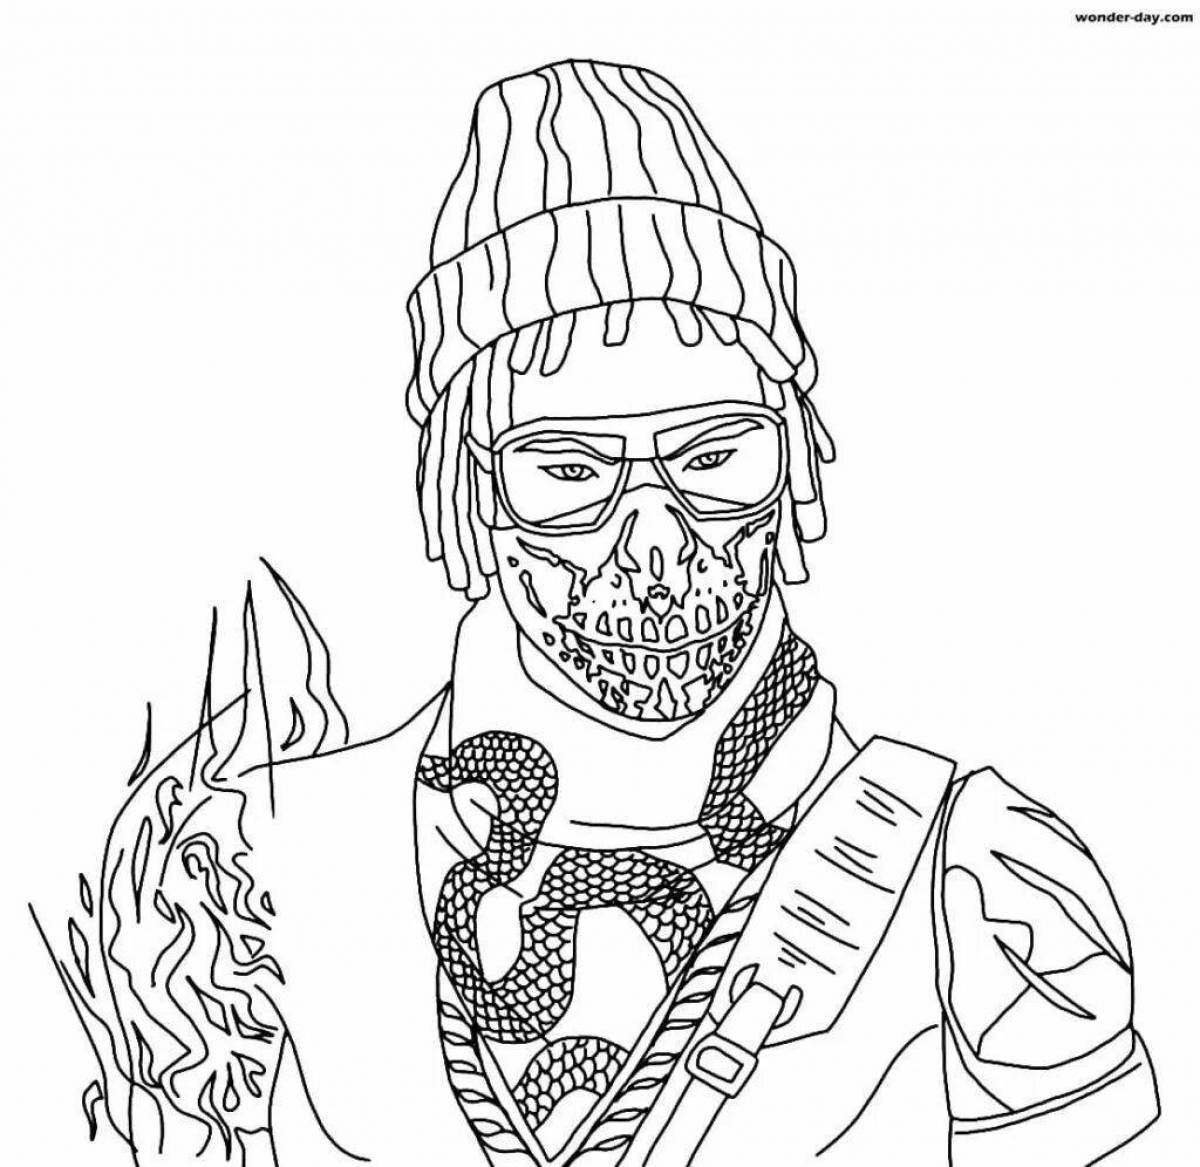 Colorful pro free fire weapon coloring page